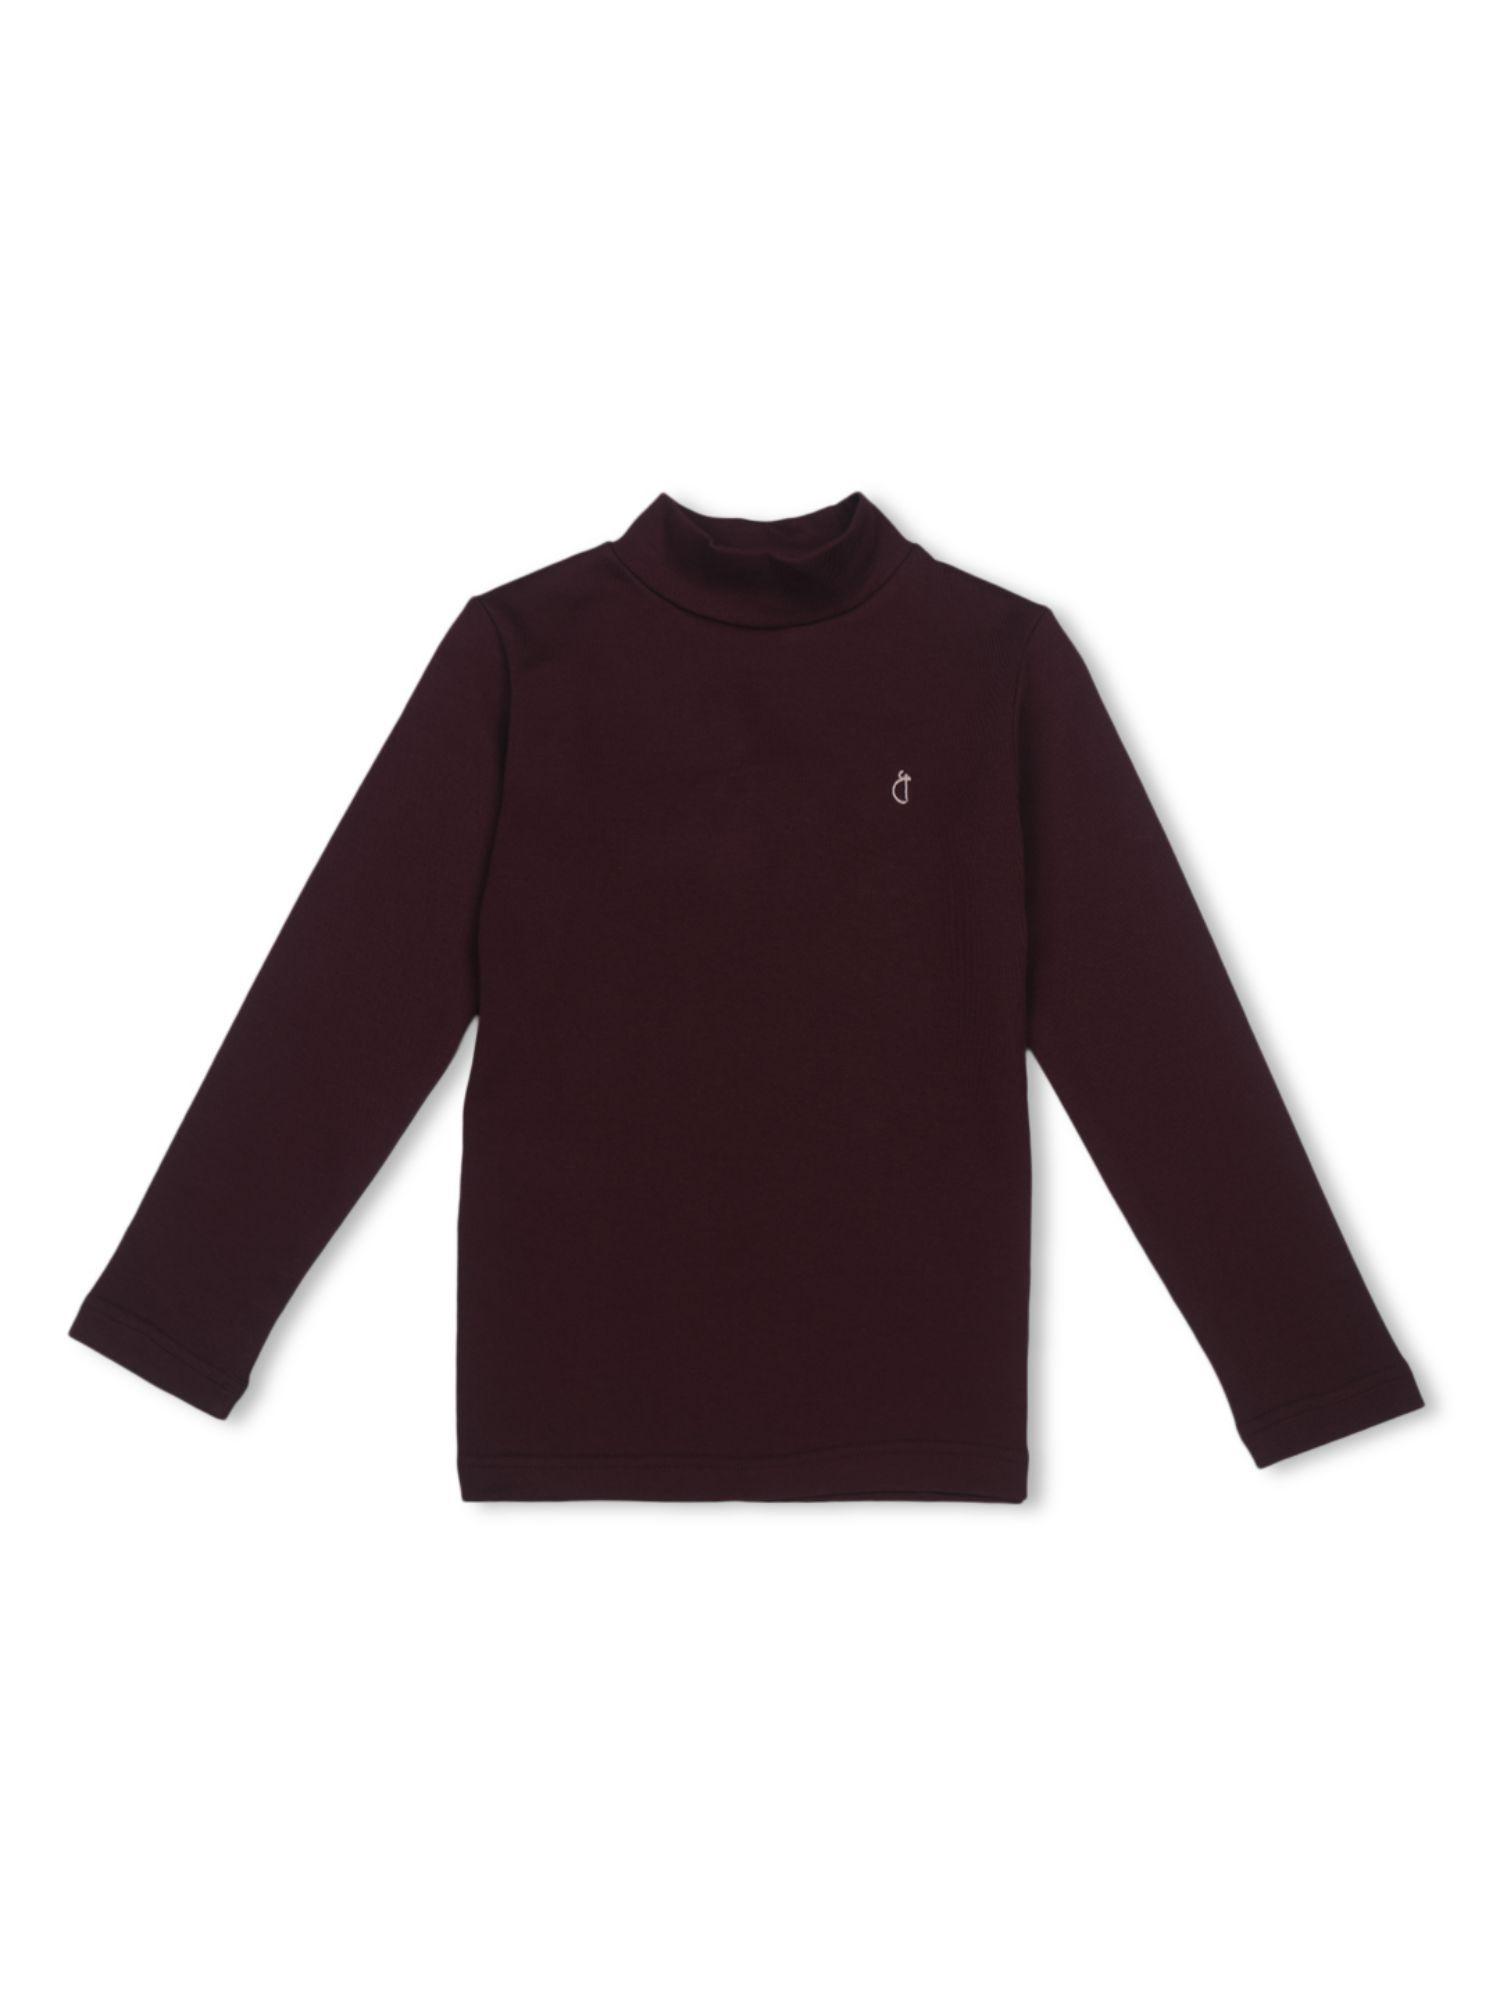 Girls Wine Cotton Solid Skivvy Full Sleeves